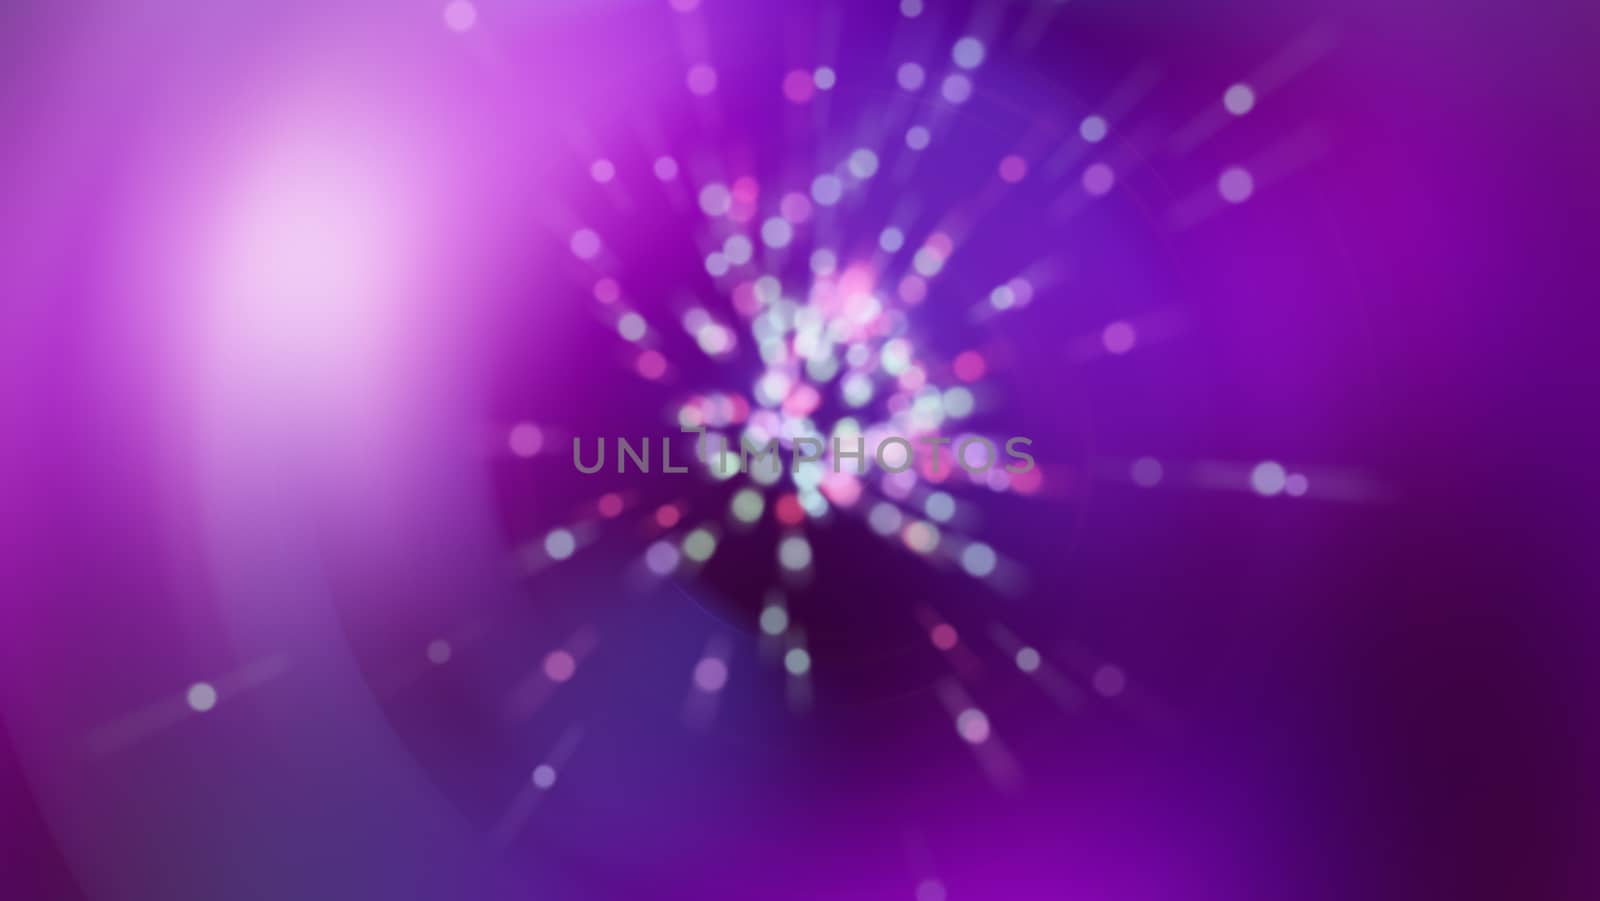 Purple bright light, shiny blurred dots, bright background, 3d rendering computer generated illustration